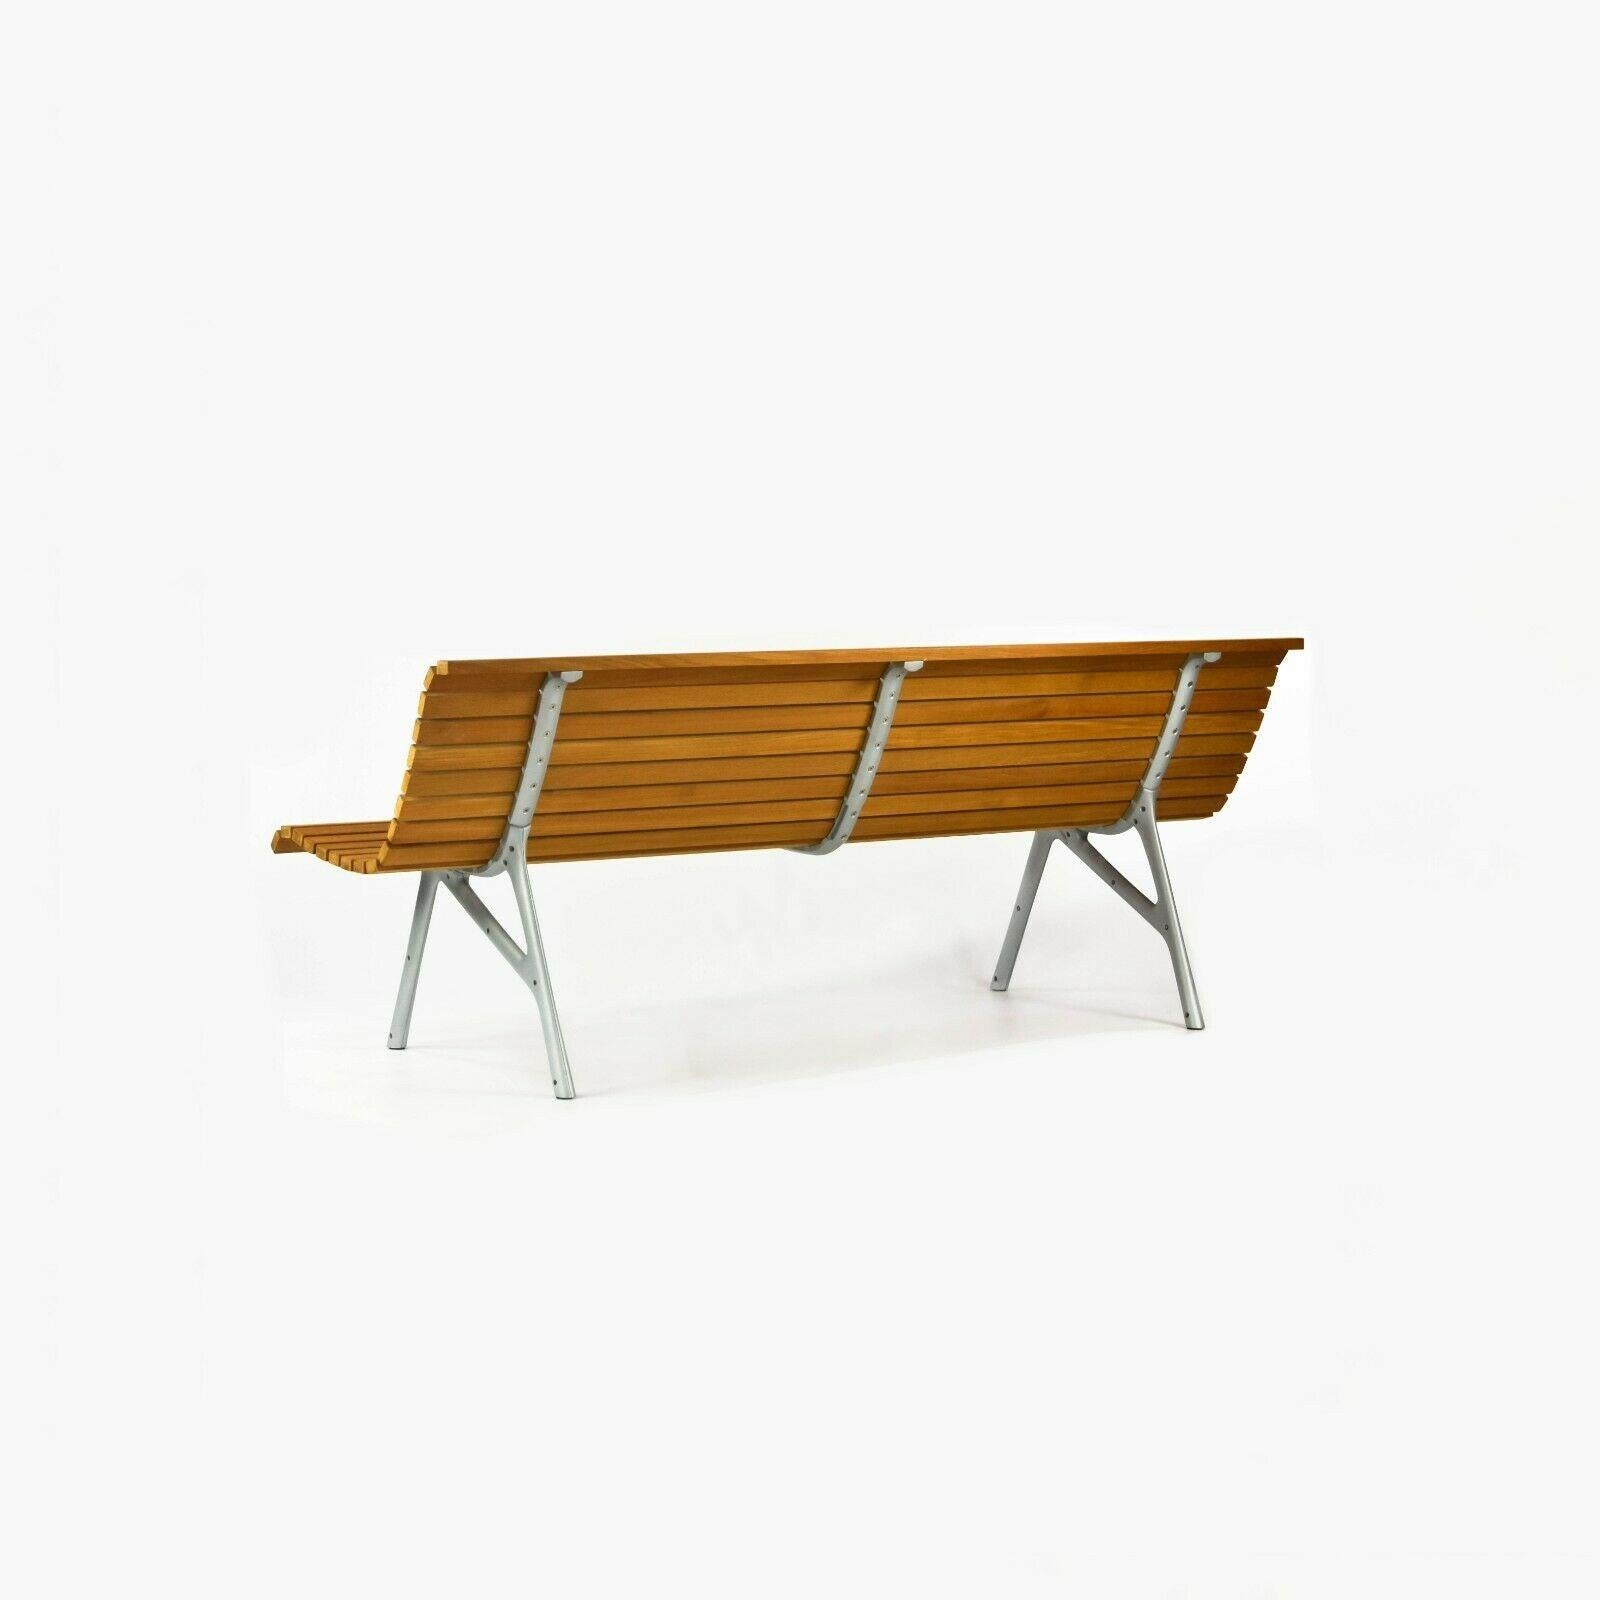 2010 Alias Teak Outdoor Three Seat Bench Settee in Cast Aluminum by Alberto Meda In Good Condition For Sale In Philadelphia, PA